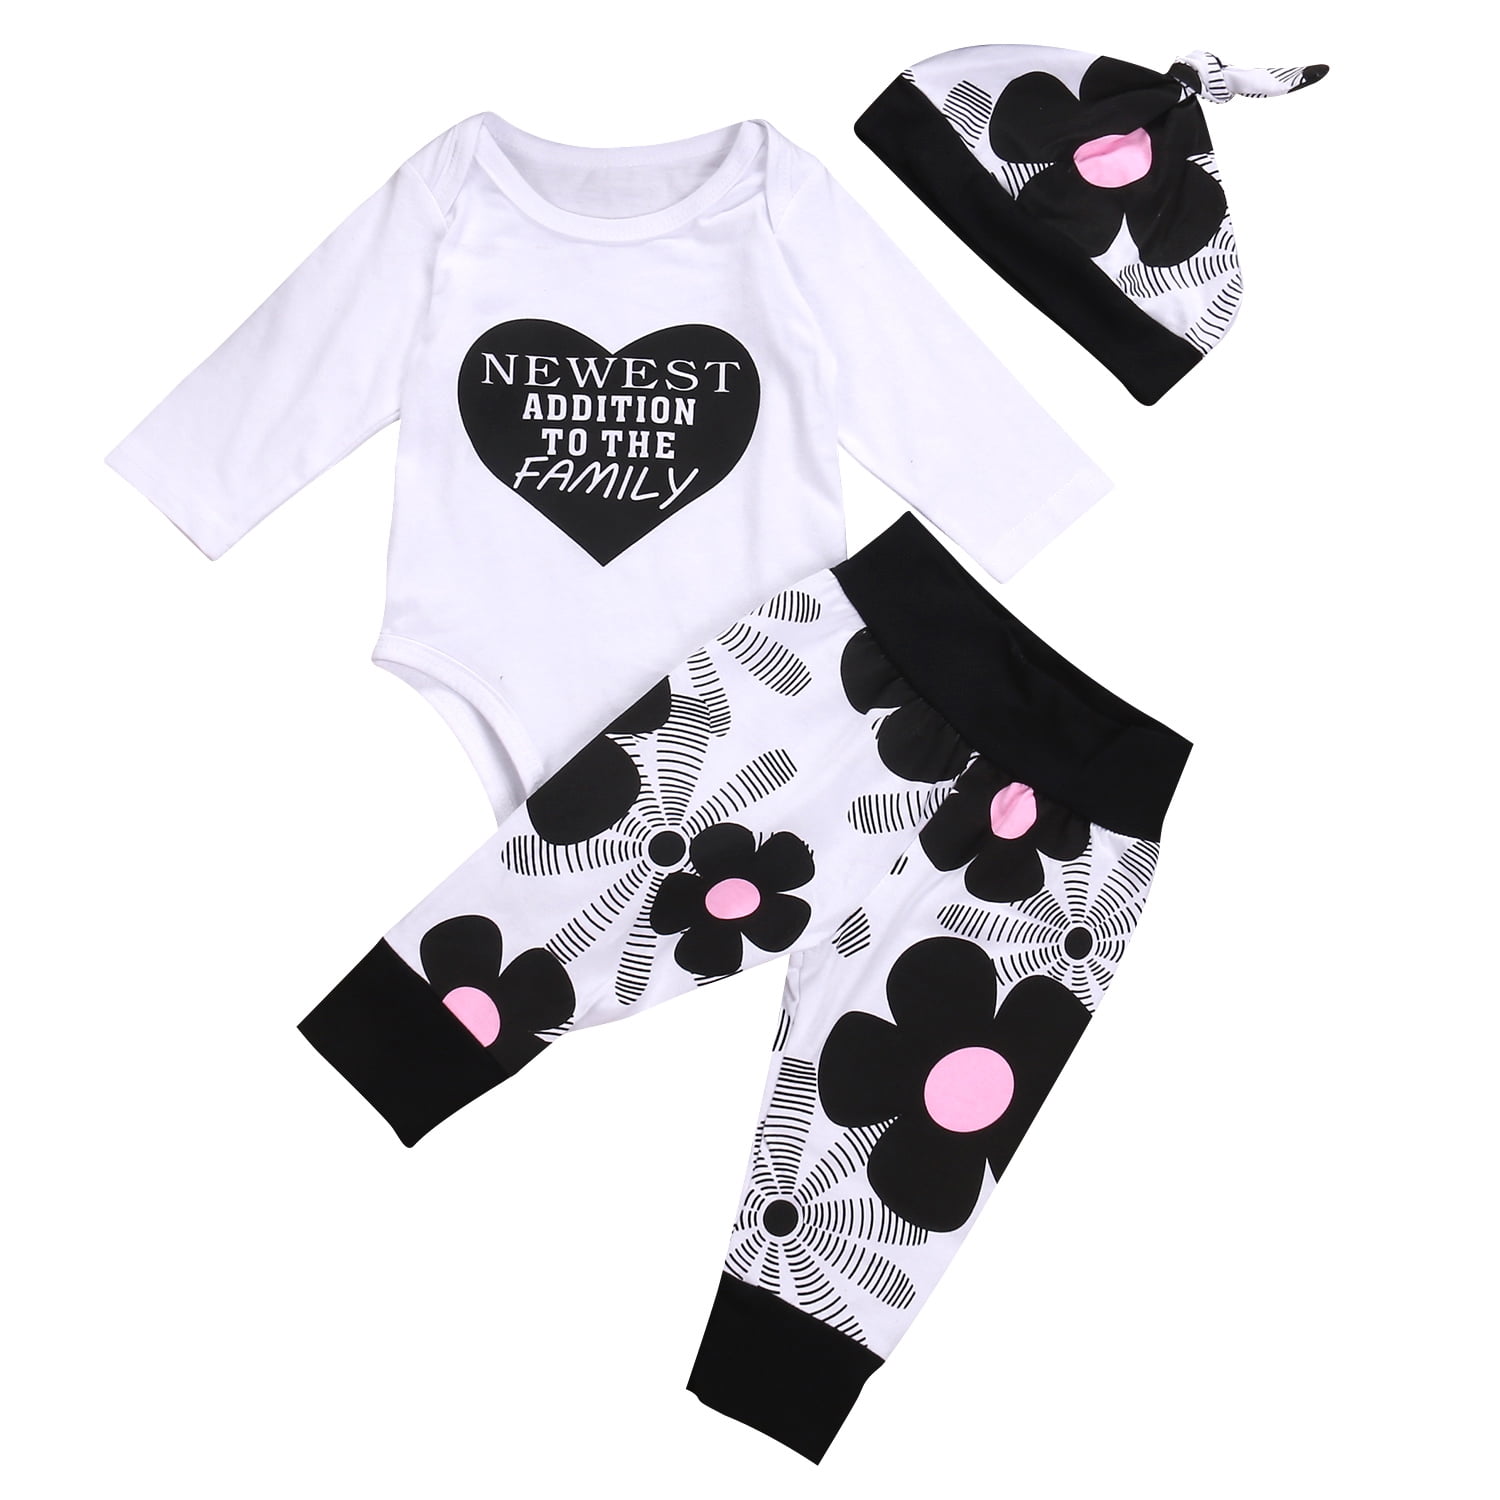 Newborn Baby Boys Girls Clothes Long Sleeve Tops Pants Trousers Hat Outfits Set